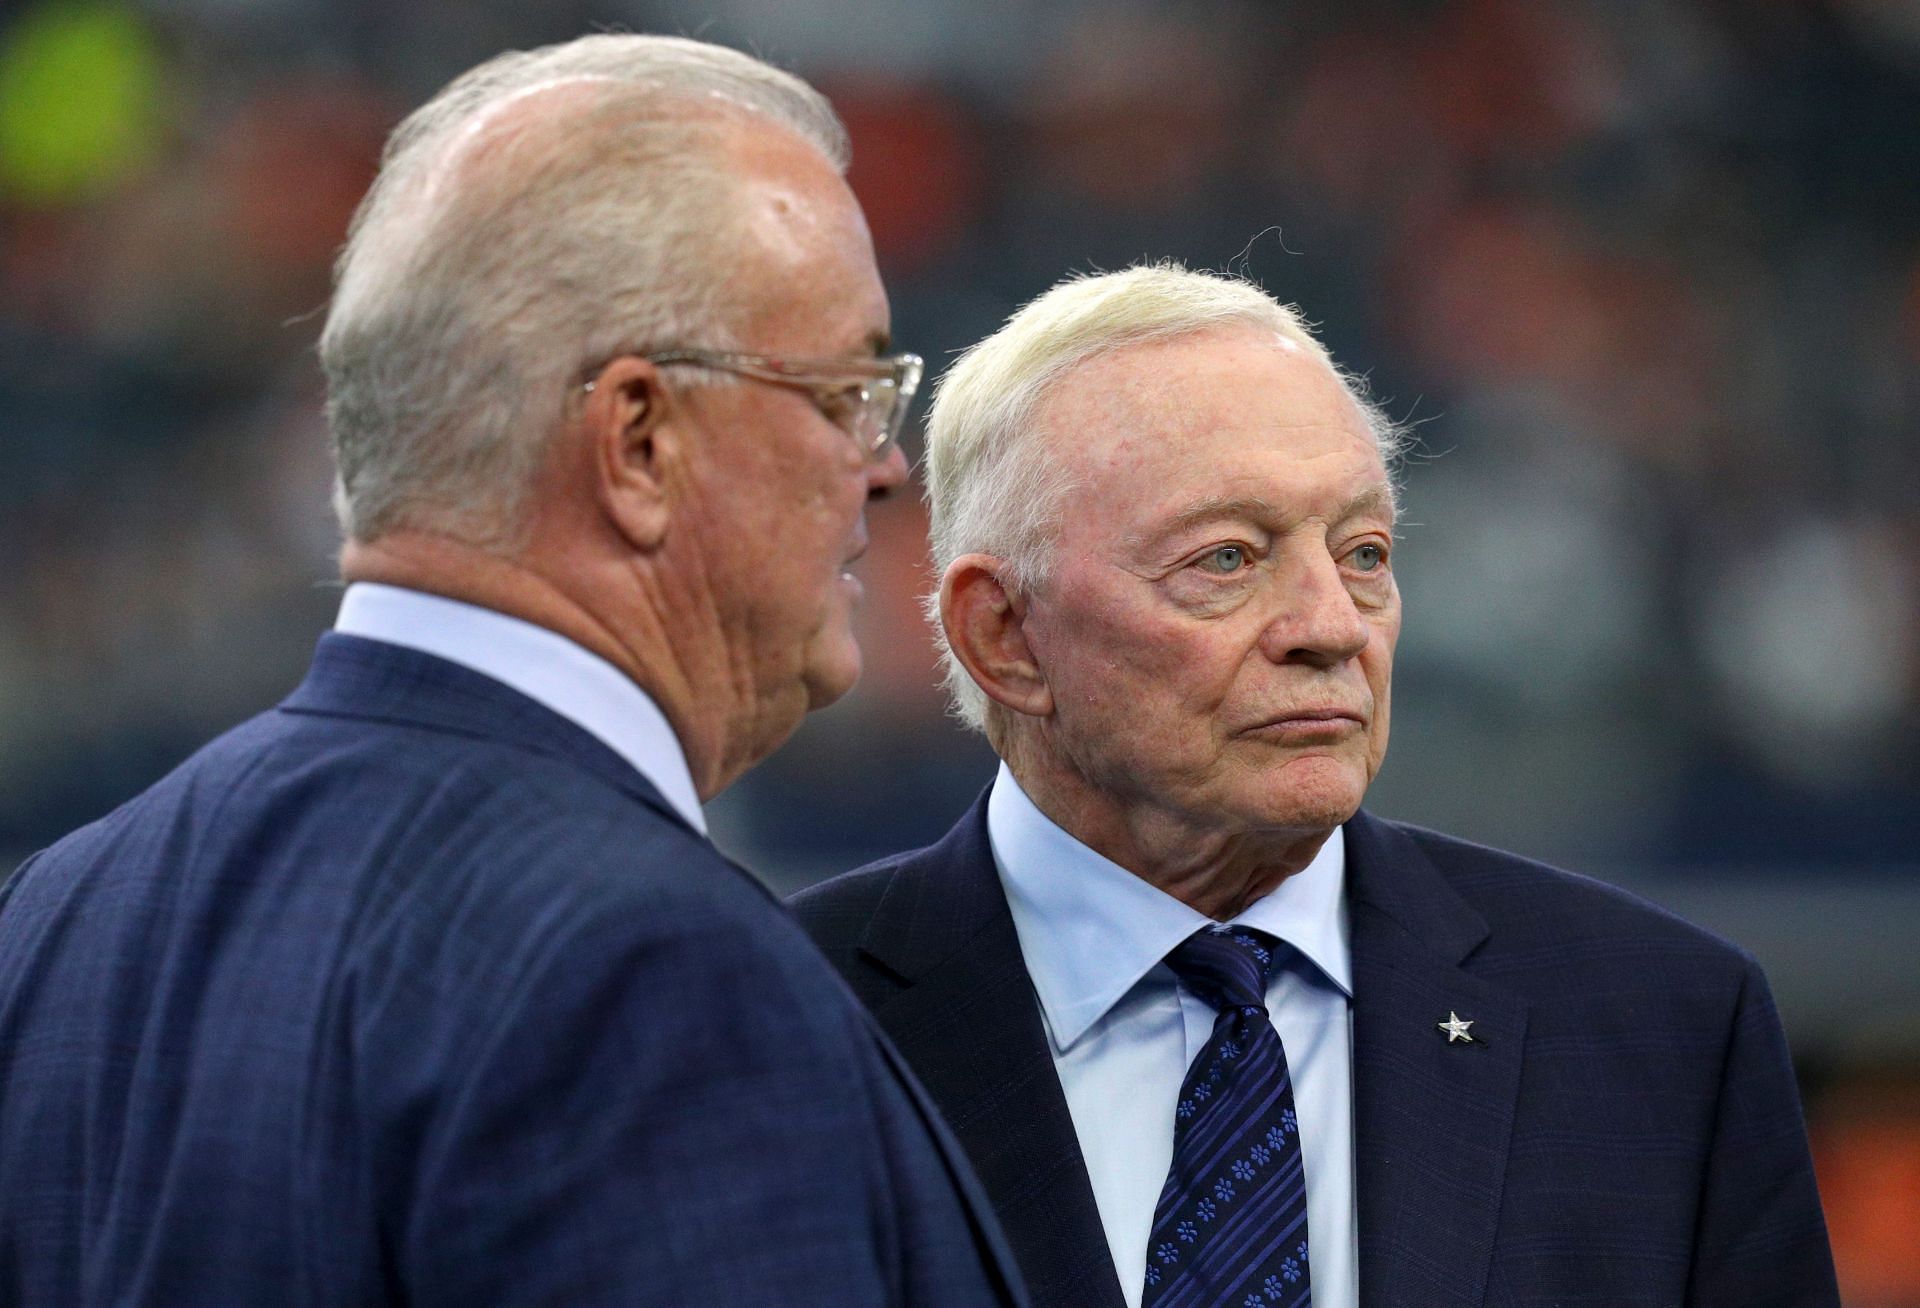 Dallas Cowboys owner Jerry Jones (Right) at a team event